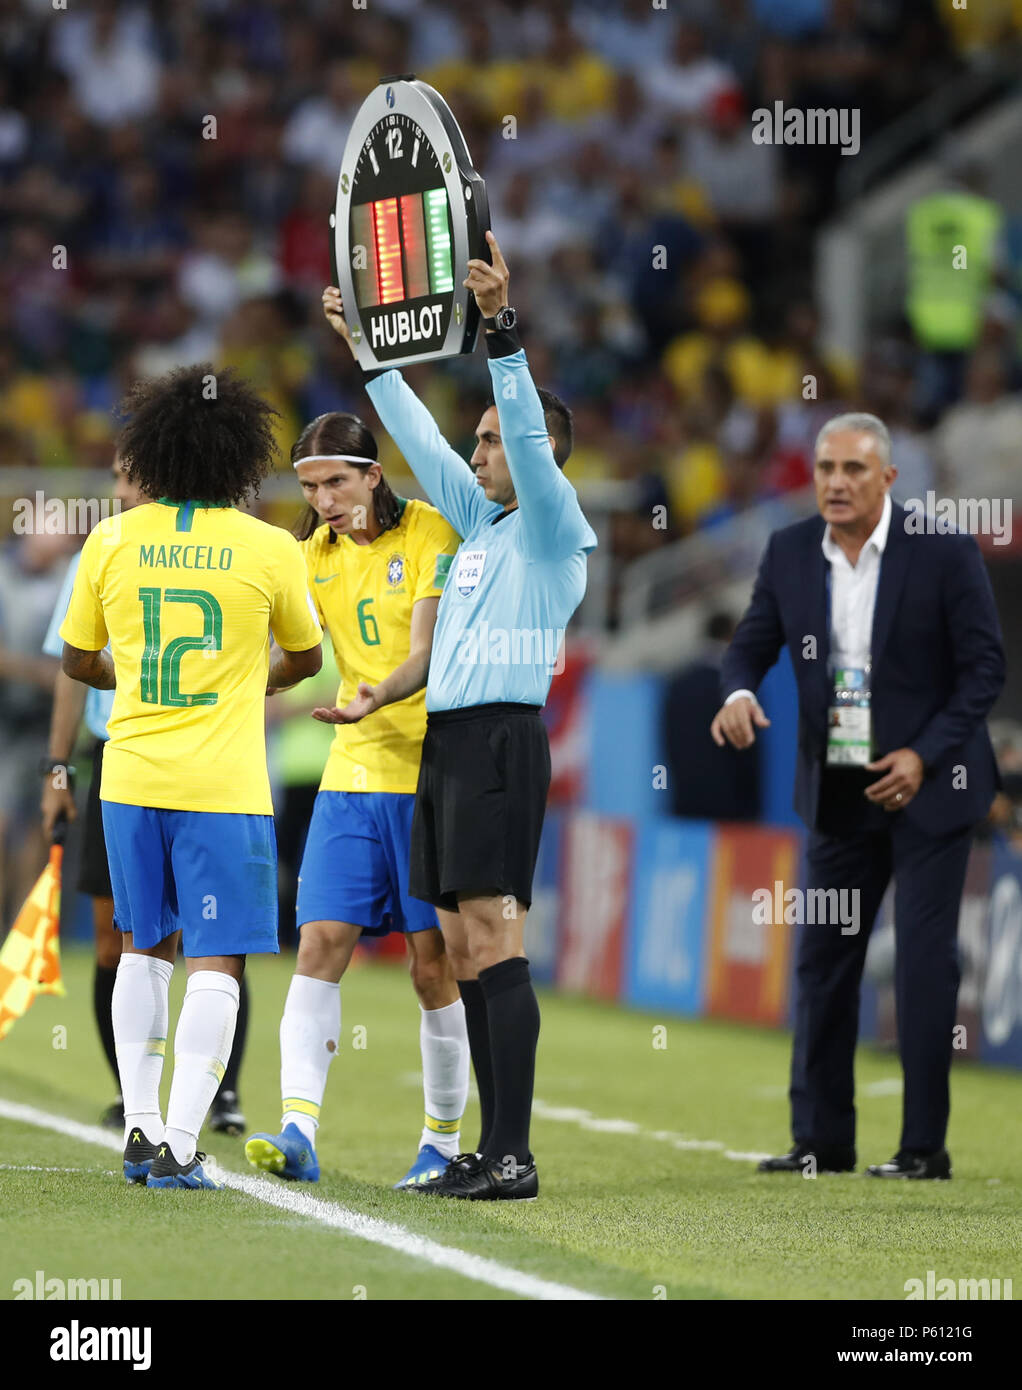 Moscow, Russia. 27th June, 2018. Marcelo (L) of Brazil is substituted off after his injury during the 2018 FIFA World Cup Group E match between Brazil and Serbia in Moscow, Russia, June 27, 2018. Credit: Cao Can/Xinhua/Alamy Live News Stock Photo